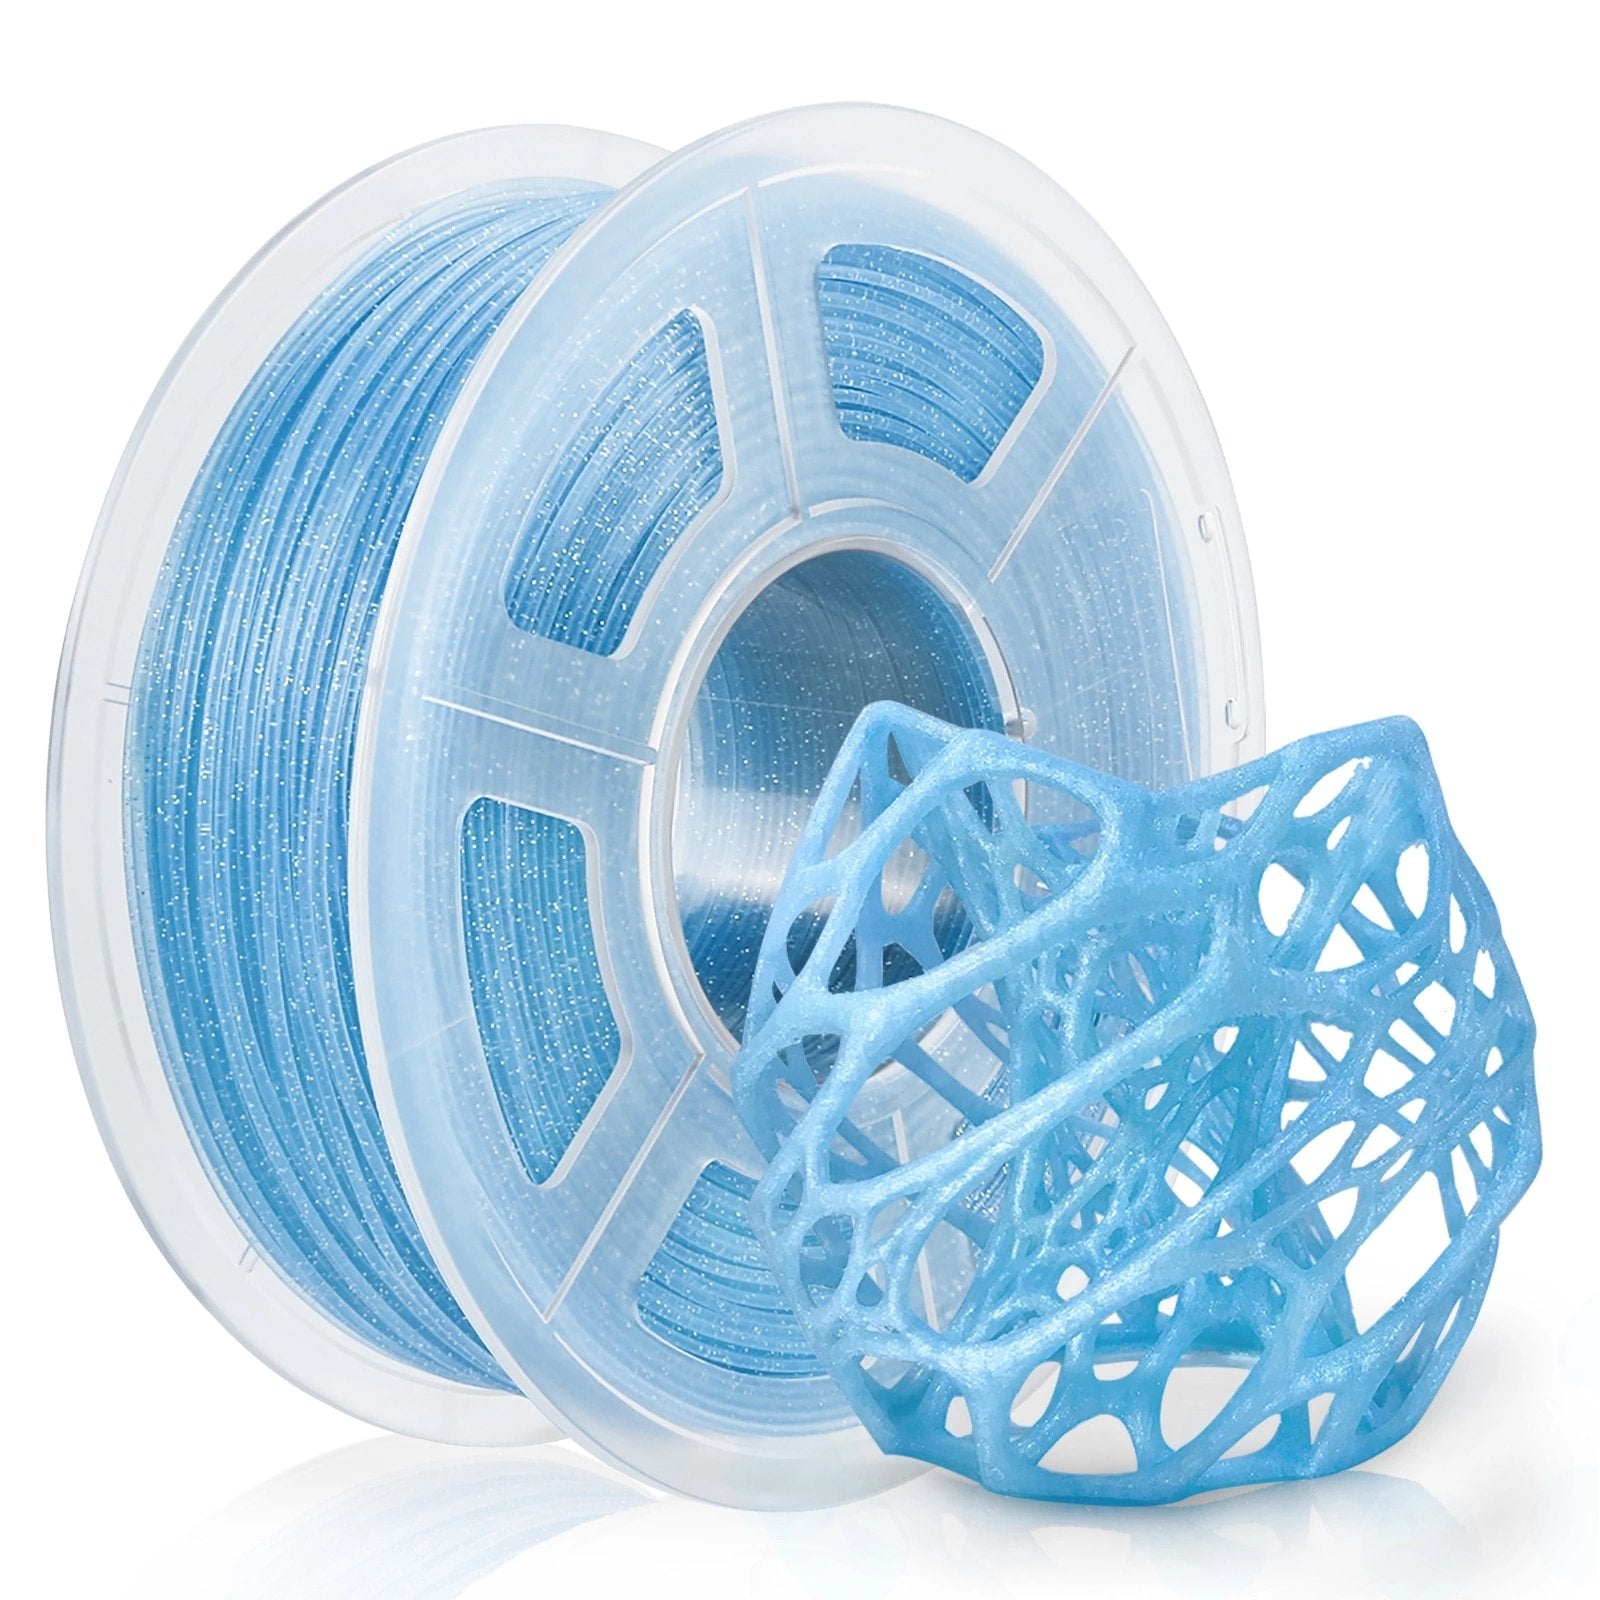 Timber Wood PLA Filament for 3D Printing - AGC Education